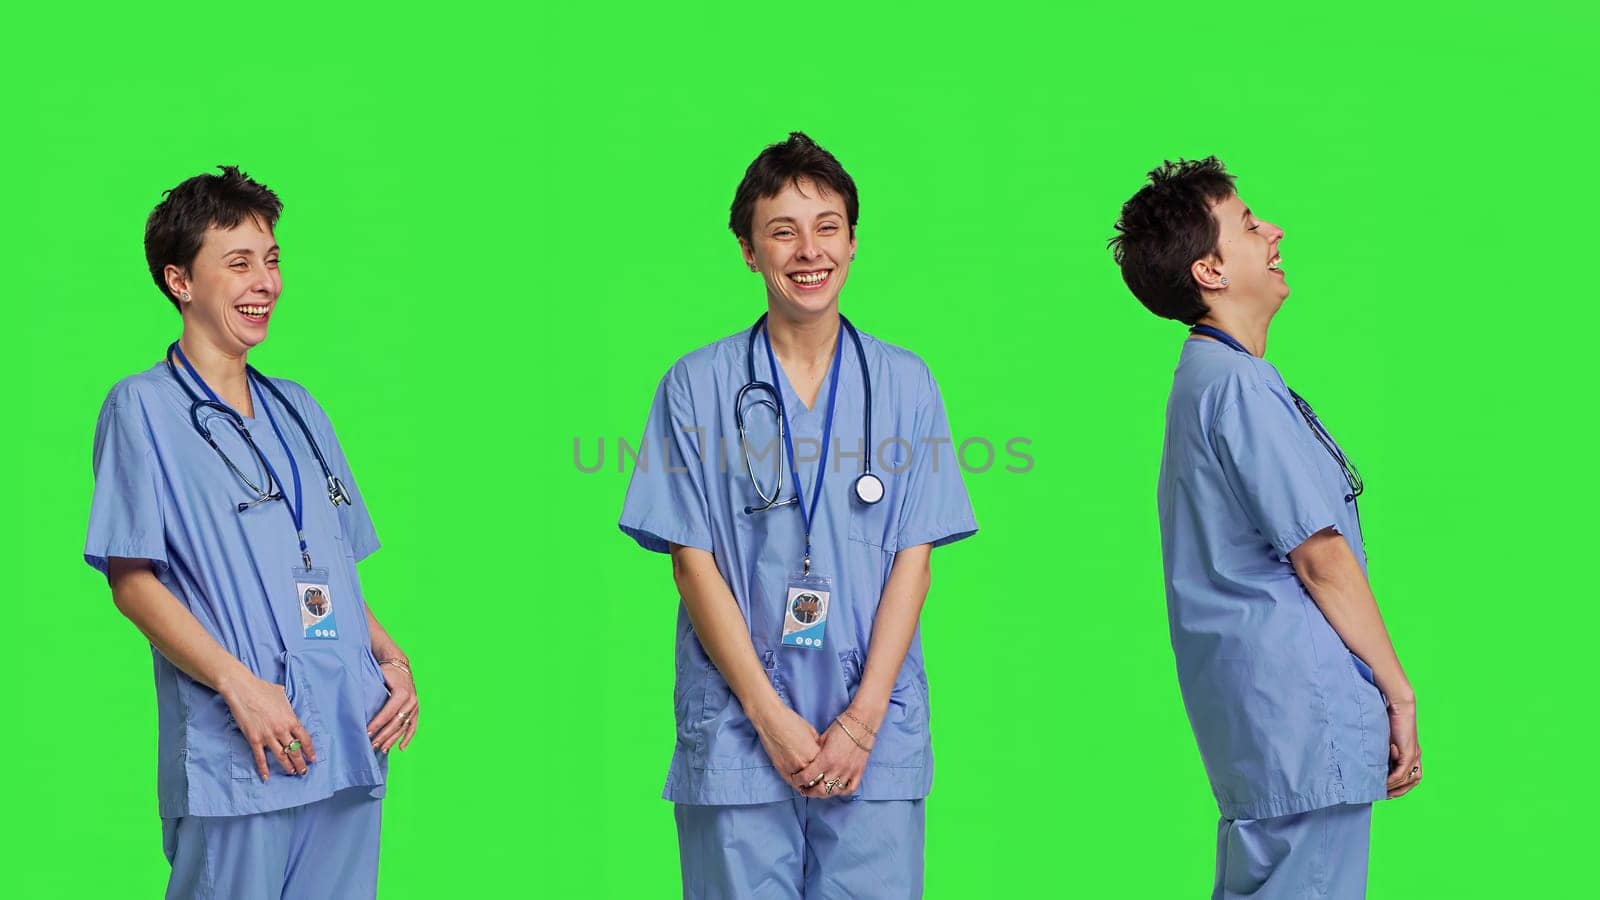 Cheerful smiling medical assistant standing against greenscreen backdrop, feeling confident and successful while she wears hospital scrubs. Nurse surgeon works in healthcare industry. Camera B.